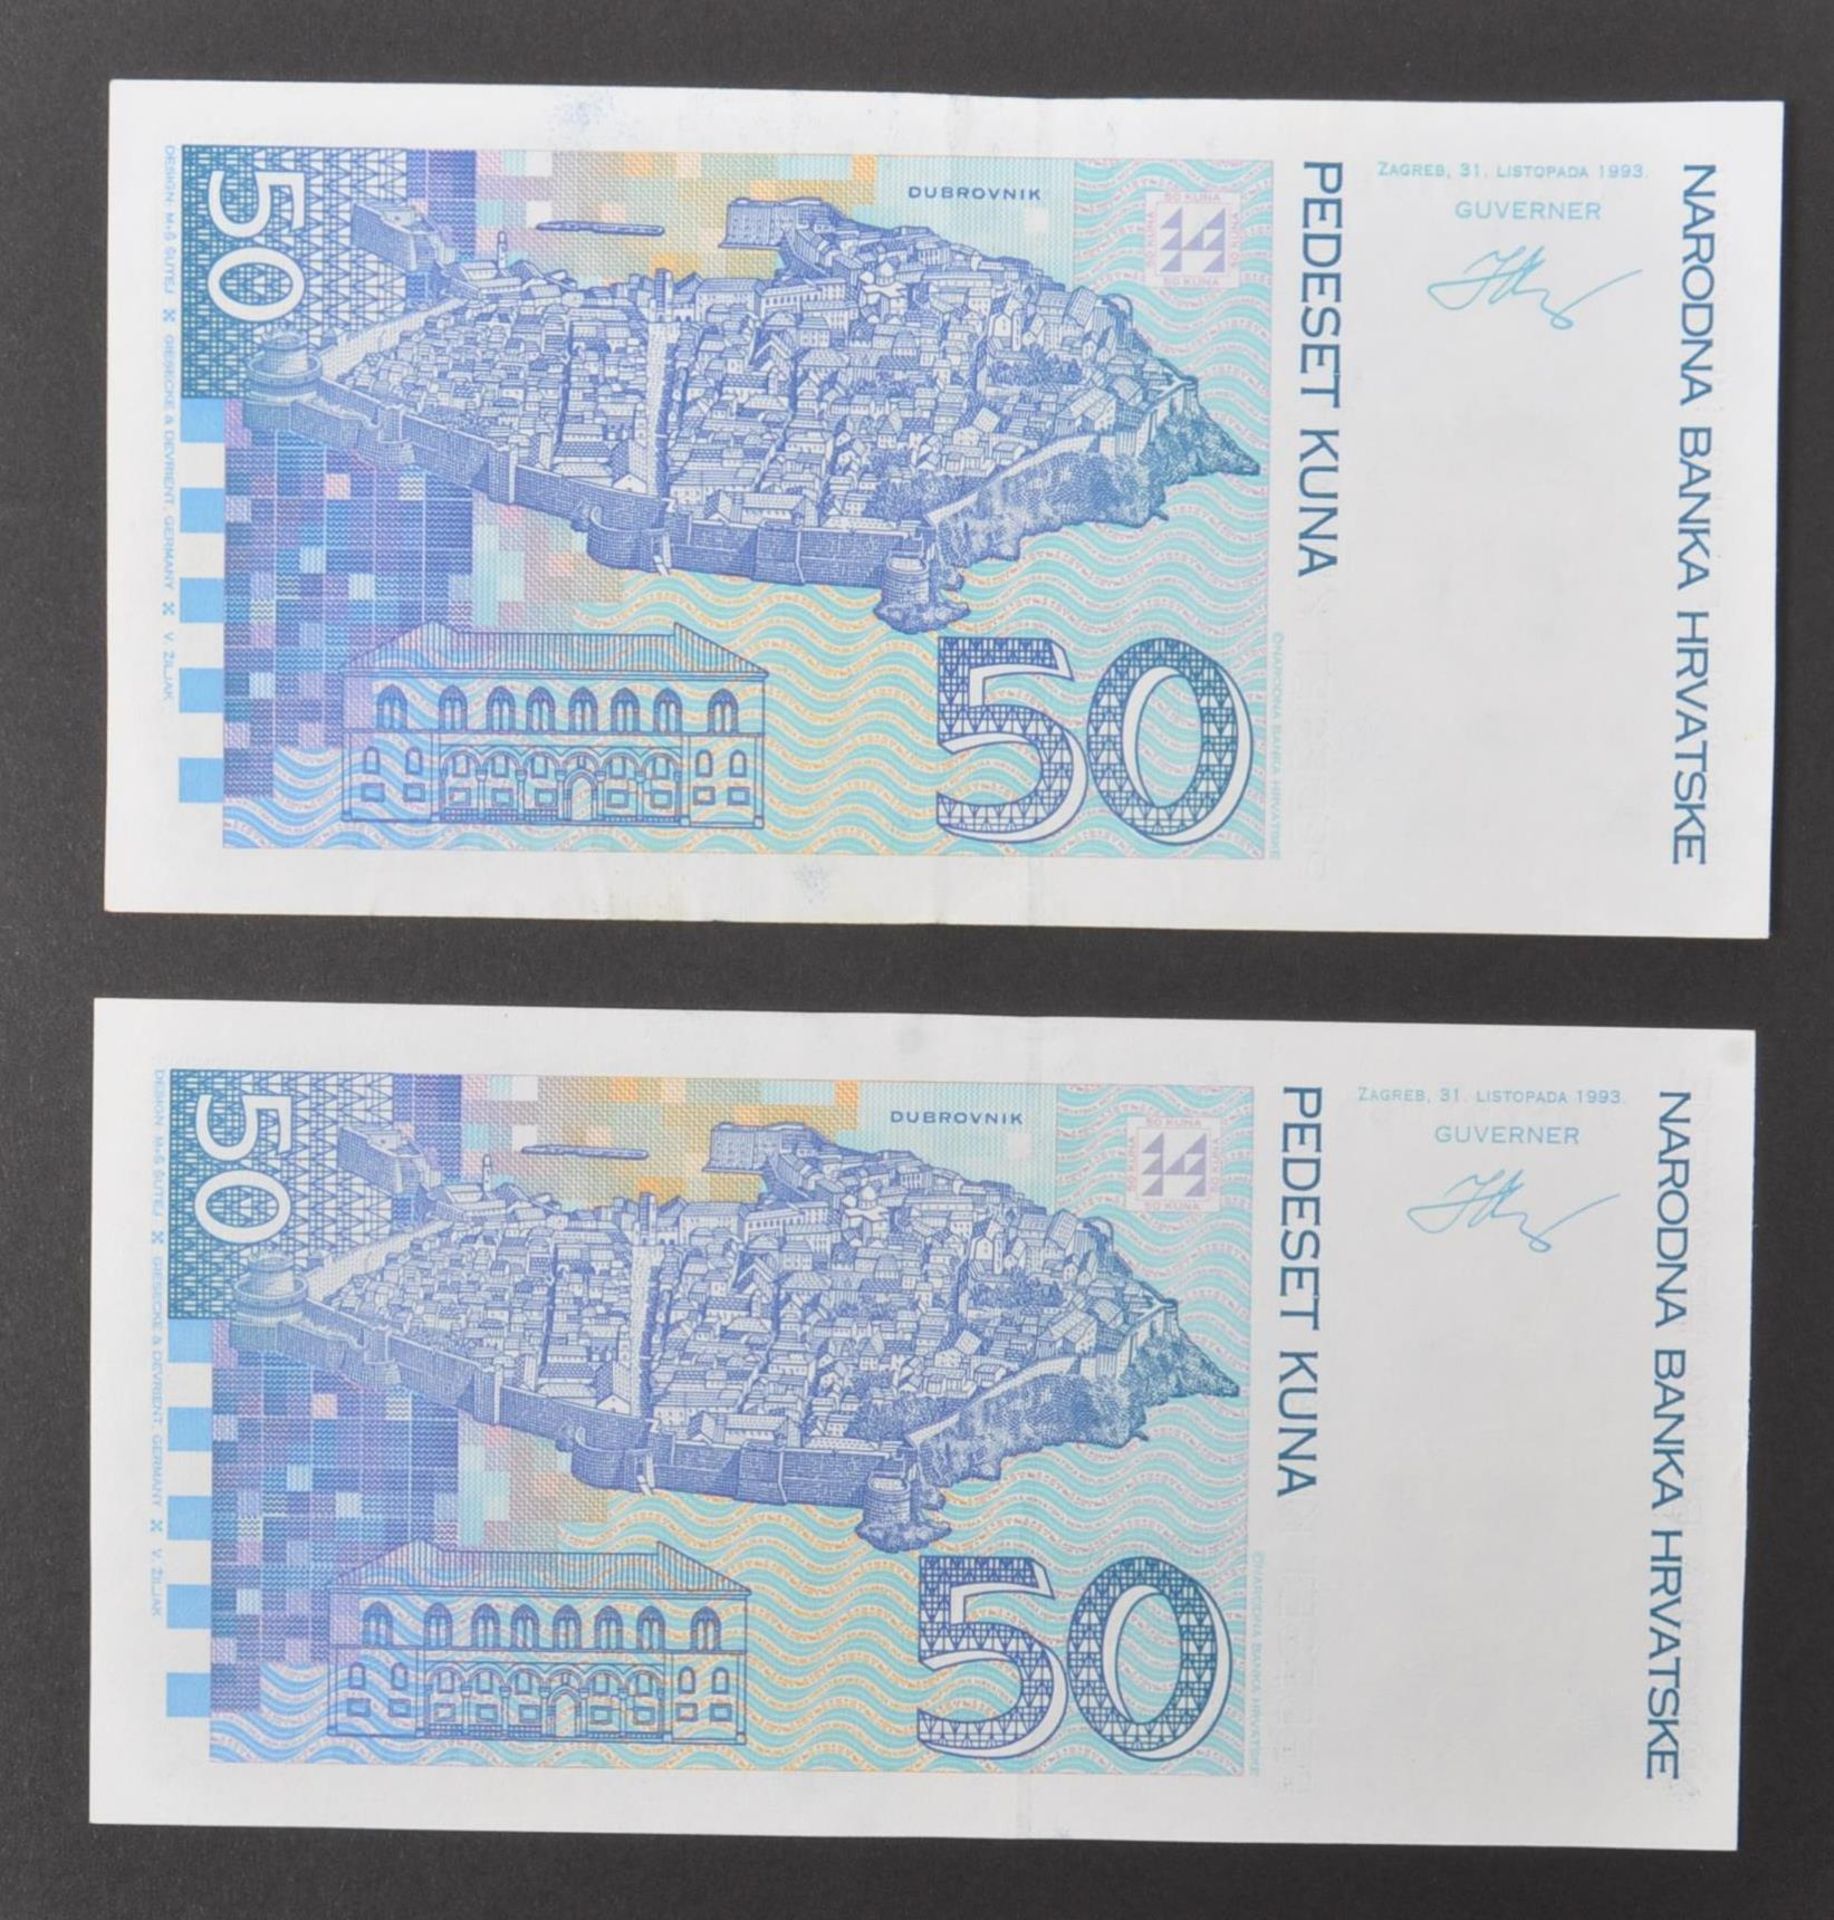 INTERNATIONAL MOSTLY UNCIRCULATED BANK NOTES - EUROPE - Image 18 of 30